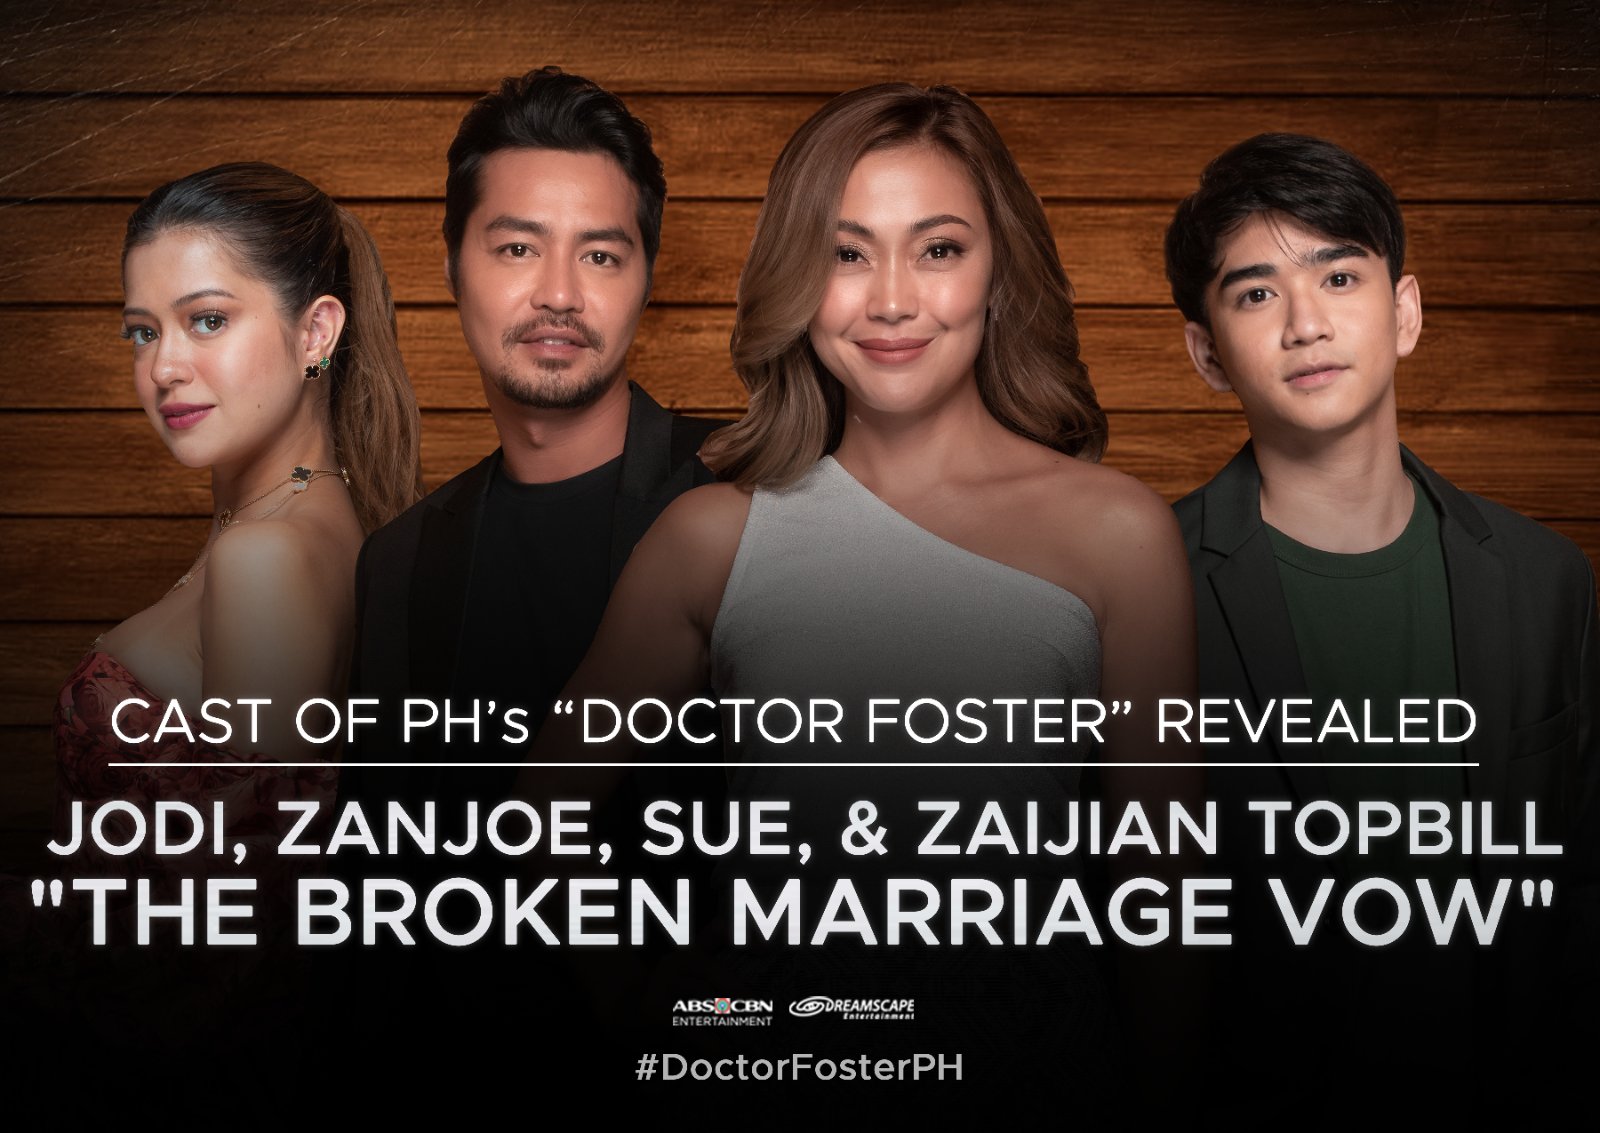 Jodi is the Pinay "Doctor Foster" in ABS-CBN's "The Broken Marriage Vow"